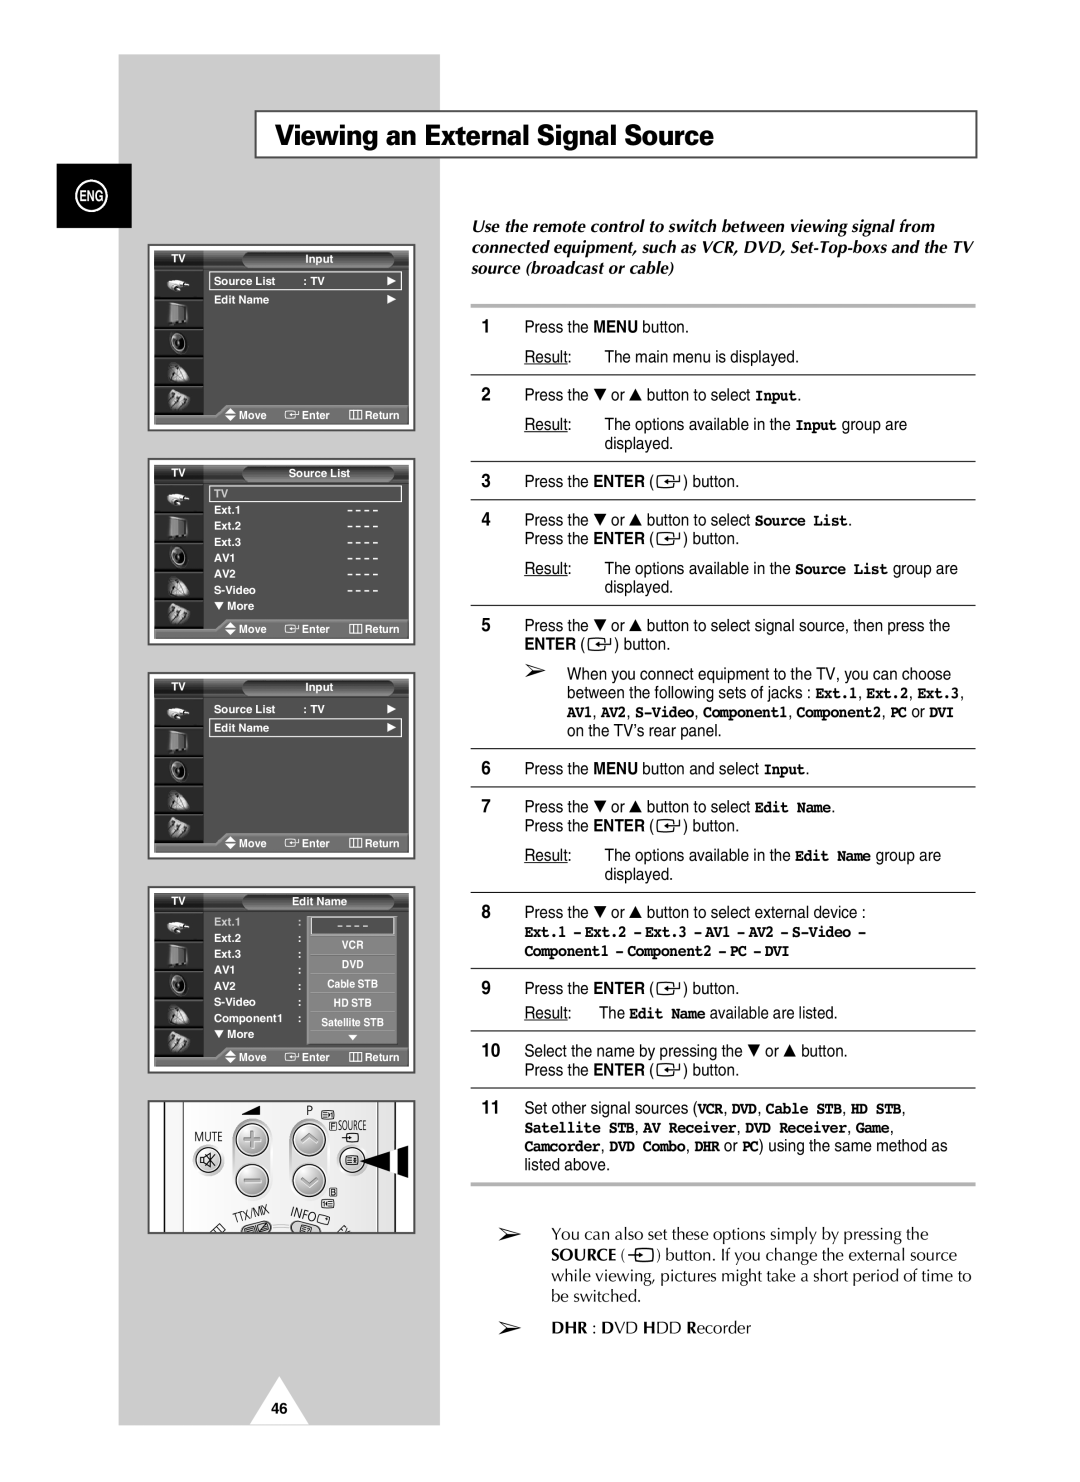 Samsung PS-37S4A manual Viewing an External Signal Source, Satellite STB, AV Receiver, DVD Receiver, Game 